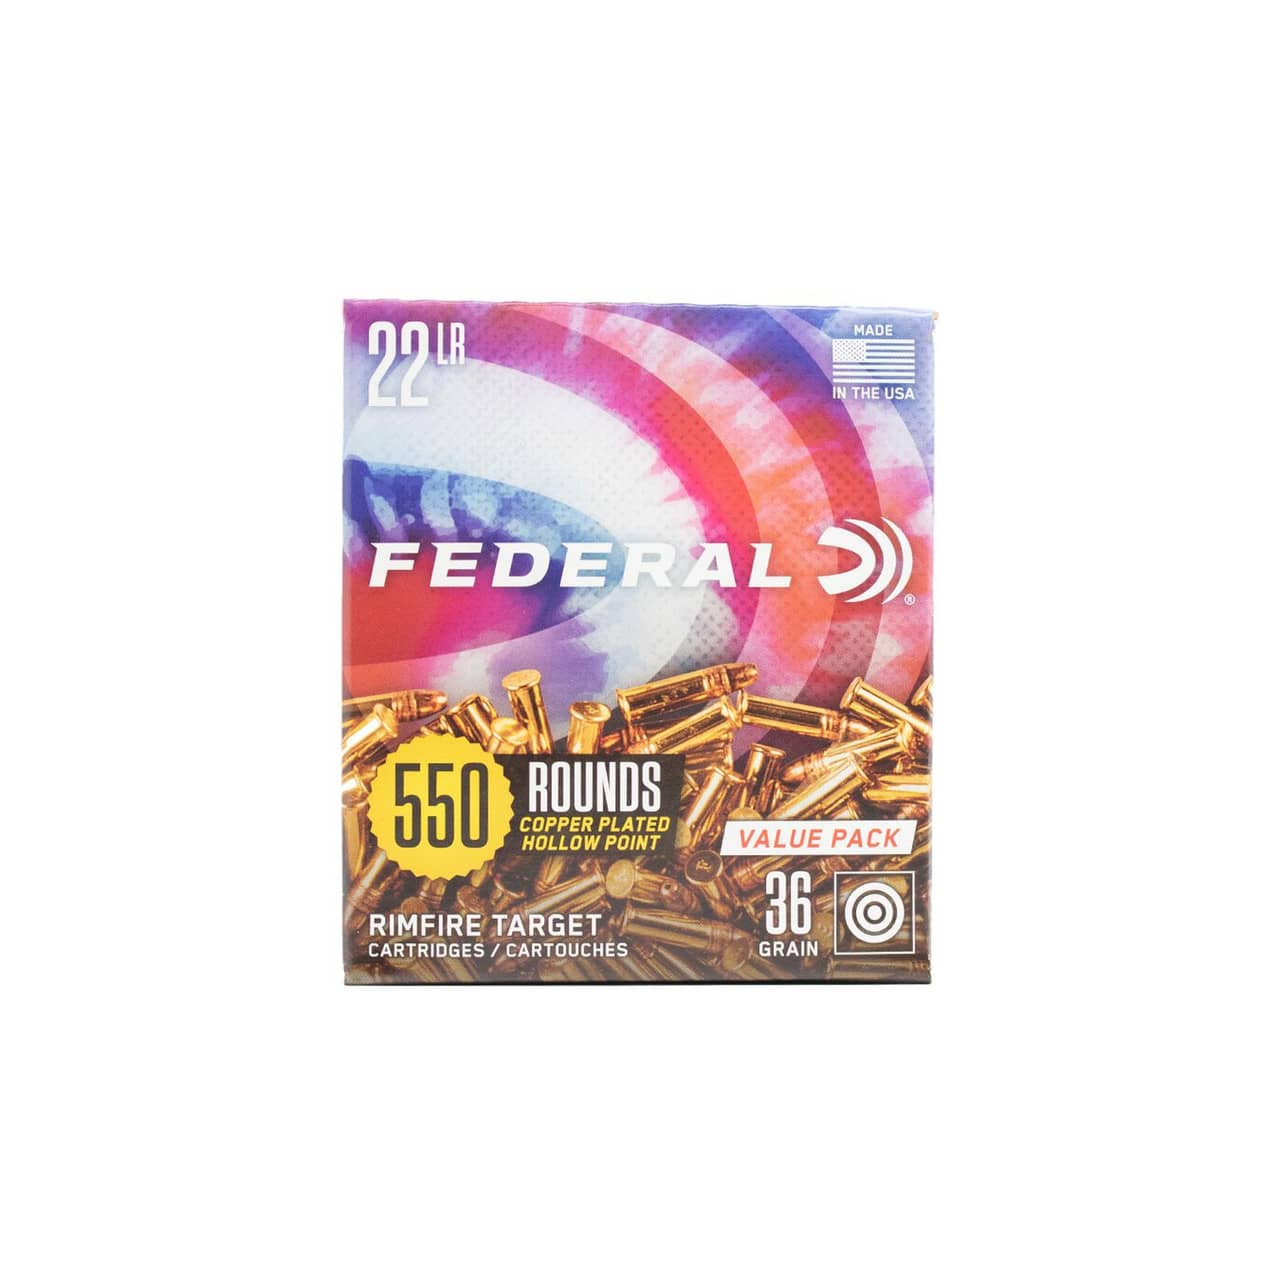 Federal® .22 LR Copper Plated Hollow Point Rimfire Ammunition